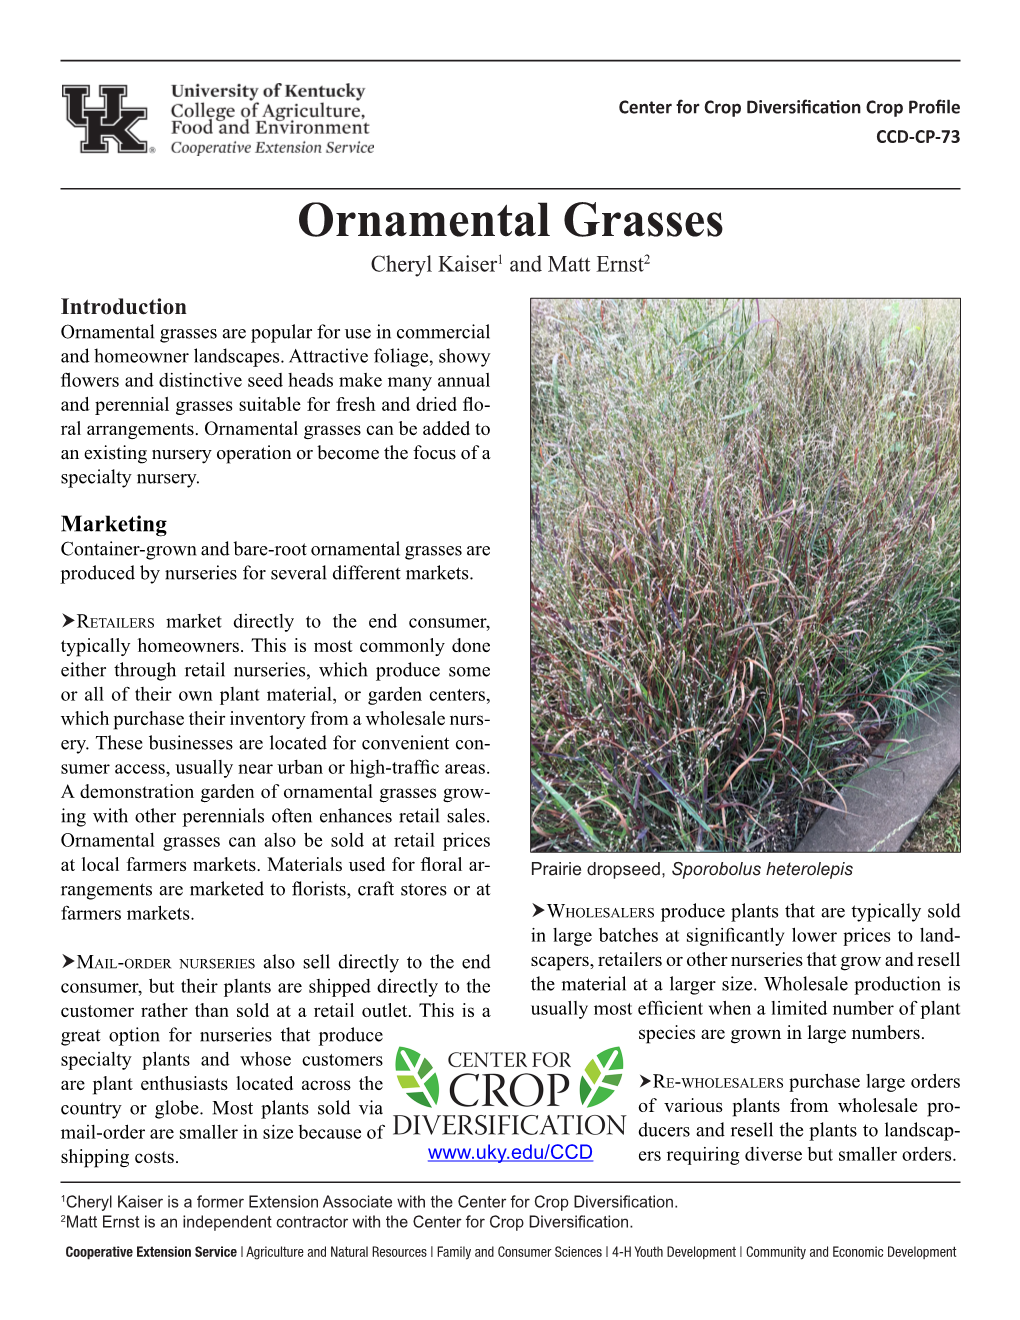 Ornamental Grasses Cheryl Kaiser1 and Matt Ernst2 Introduction Ornamental Grasses Are Popular for Use in Commercial and Homeowner Landscapes